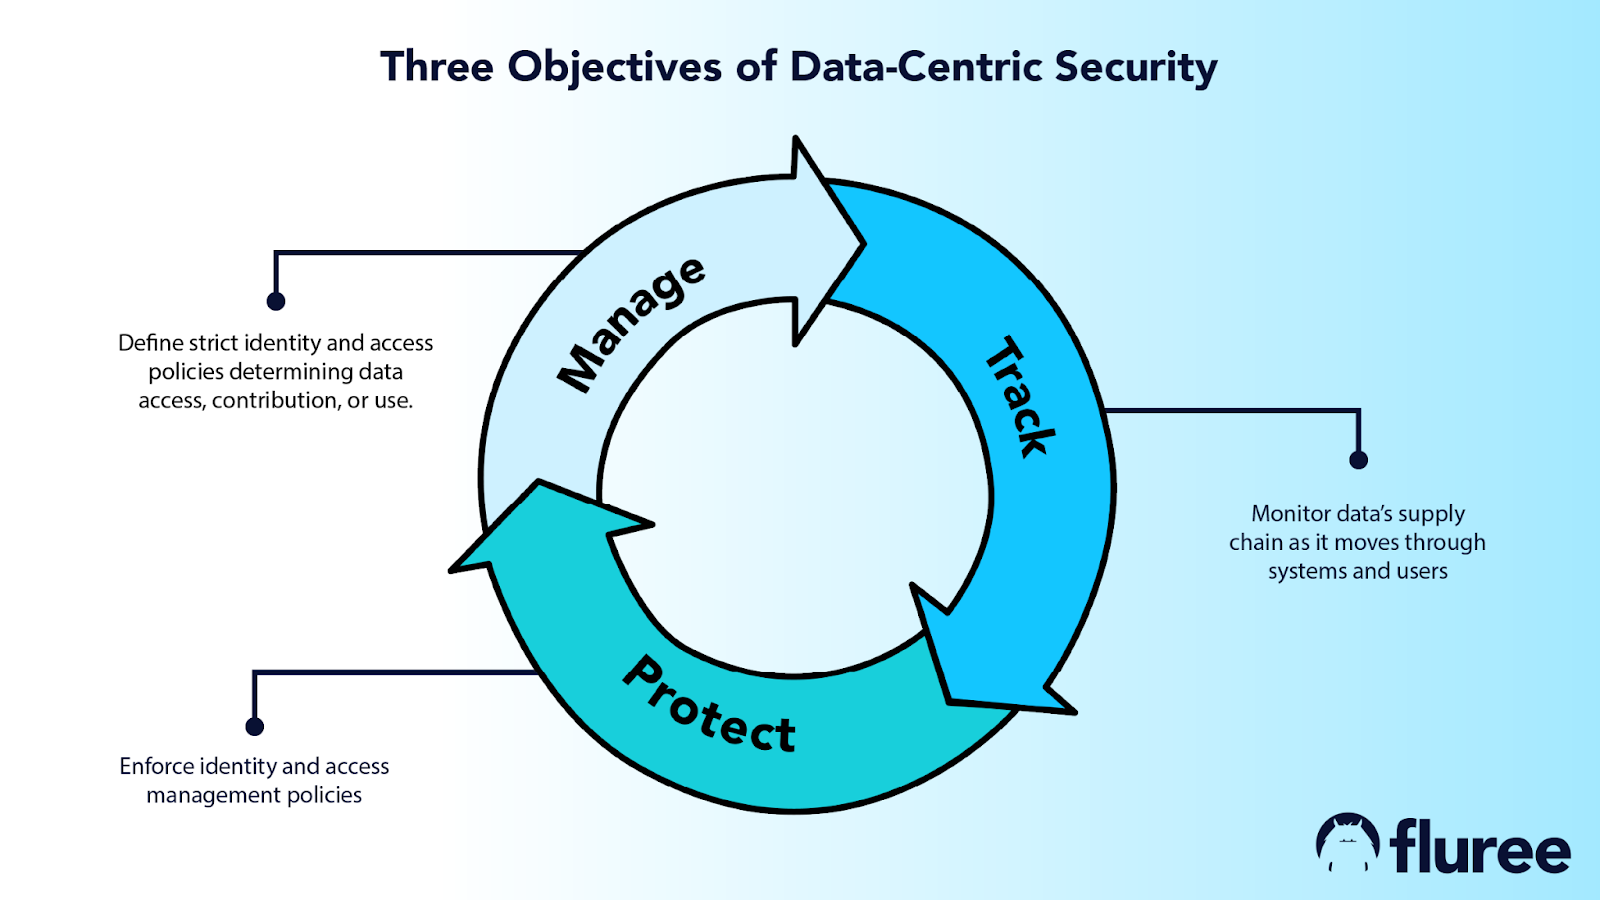 This image shows a mobius loop that represents the three objectives of data-centric security. Part 1 is manage, meaning to define strict identity and access policies determining data access, contribution, or use. Part 2 is track, defined as: monitor data's supply chain as it moves through systems and users. Part 3 is Protect, which is enforce identity and access management policies. These three things travel in a continuous cycle. 